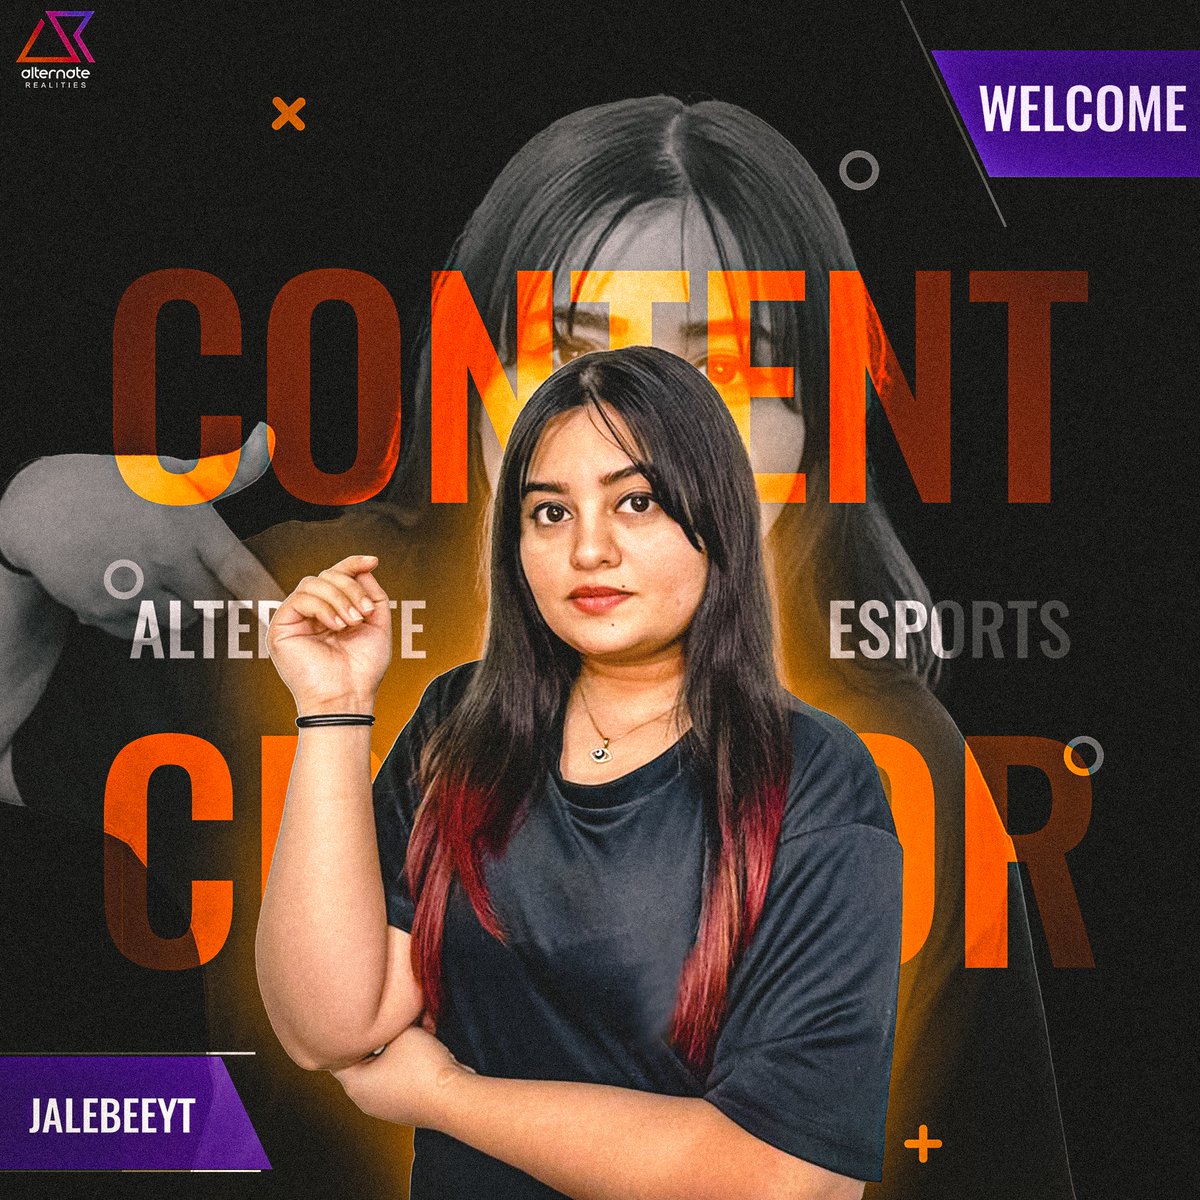 After what felt like the longest wait , Alternate Realities finally got their wish! 🤩 Introducing the newest content creator - JaLeBee! 🙋‍♂ Get ready for some mind-blowing content that will take you on a journey to other universes!!  #AlternateRealities #JourneyBegins